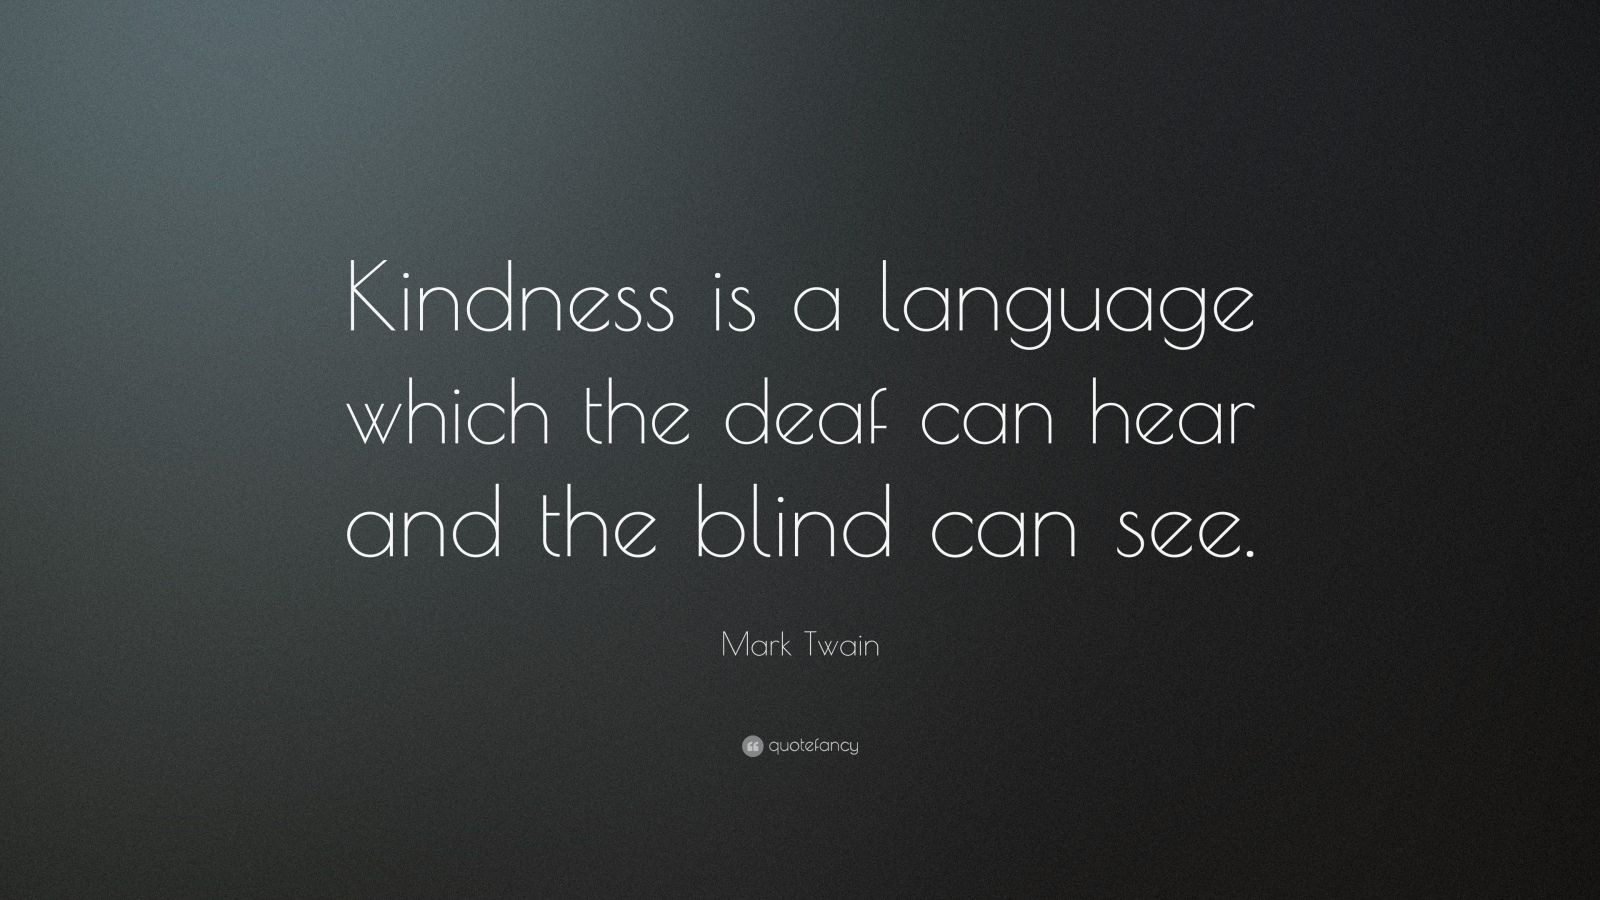 Mark Twain Kindness Quote
 Mark Twain Quote “Kindness is a language which the deaf